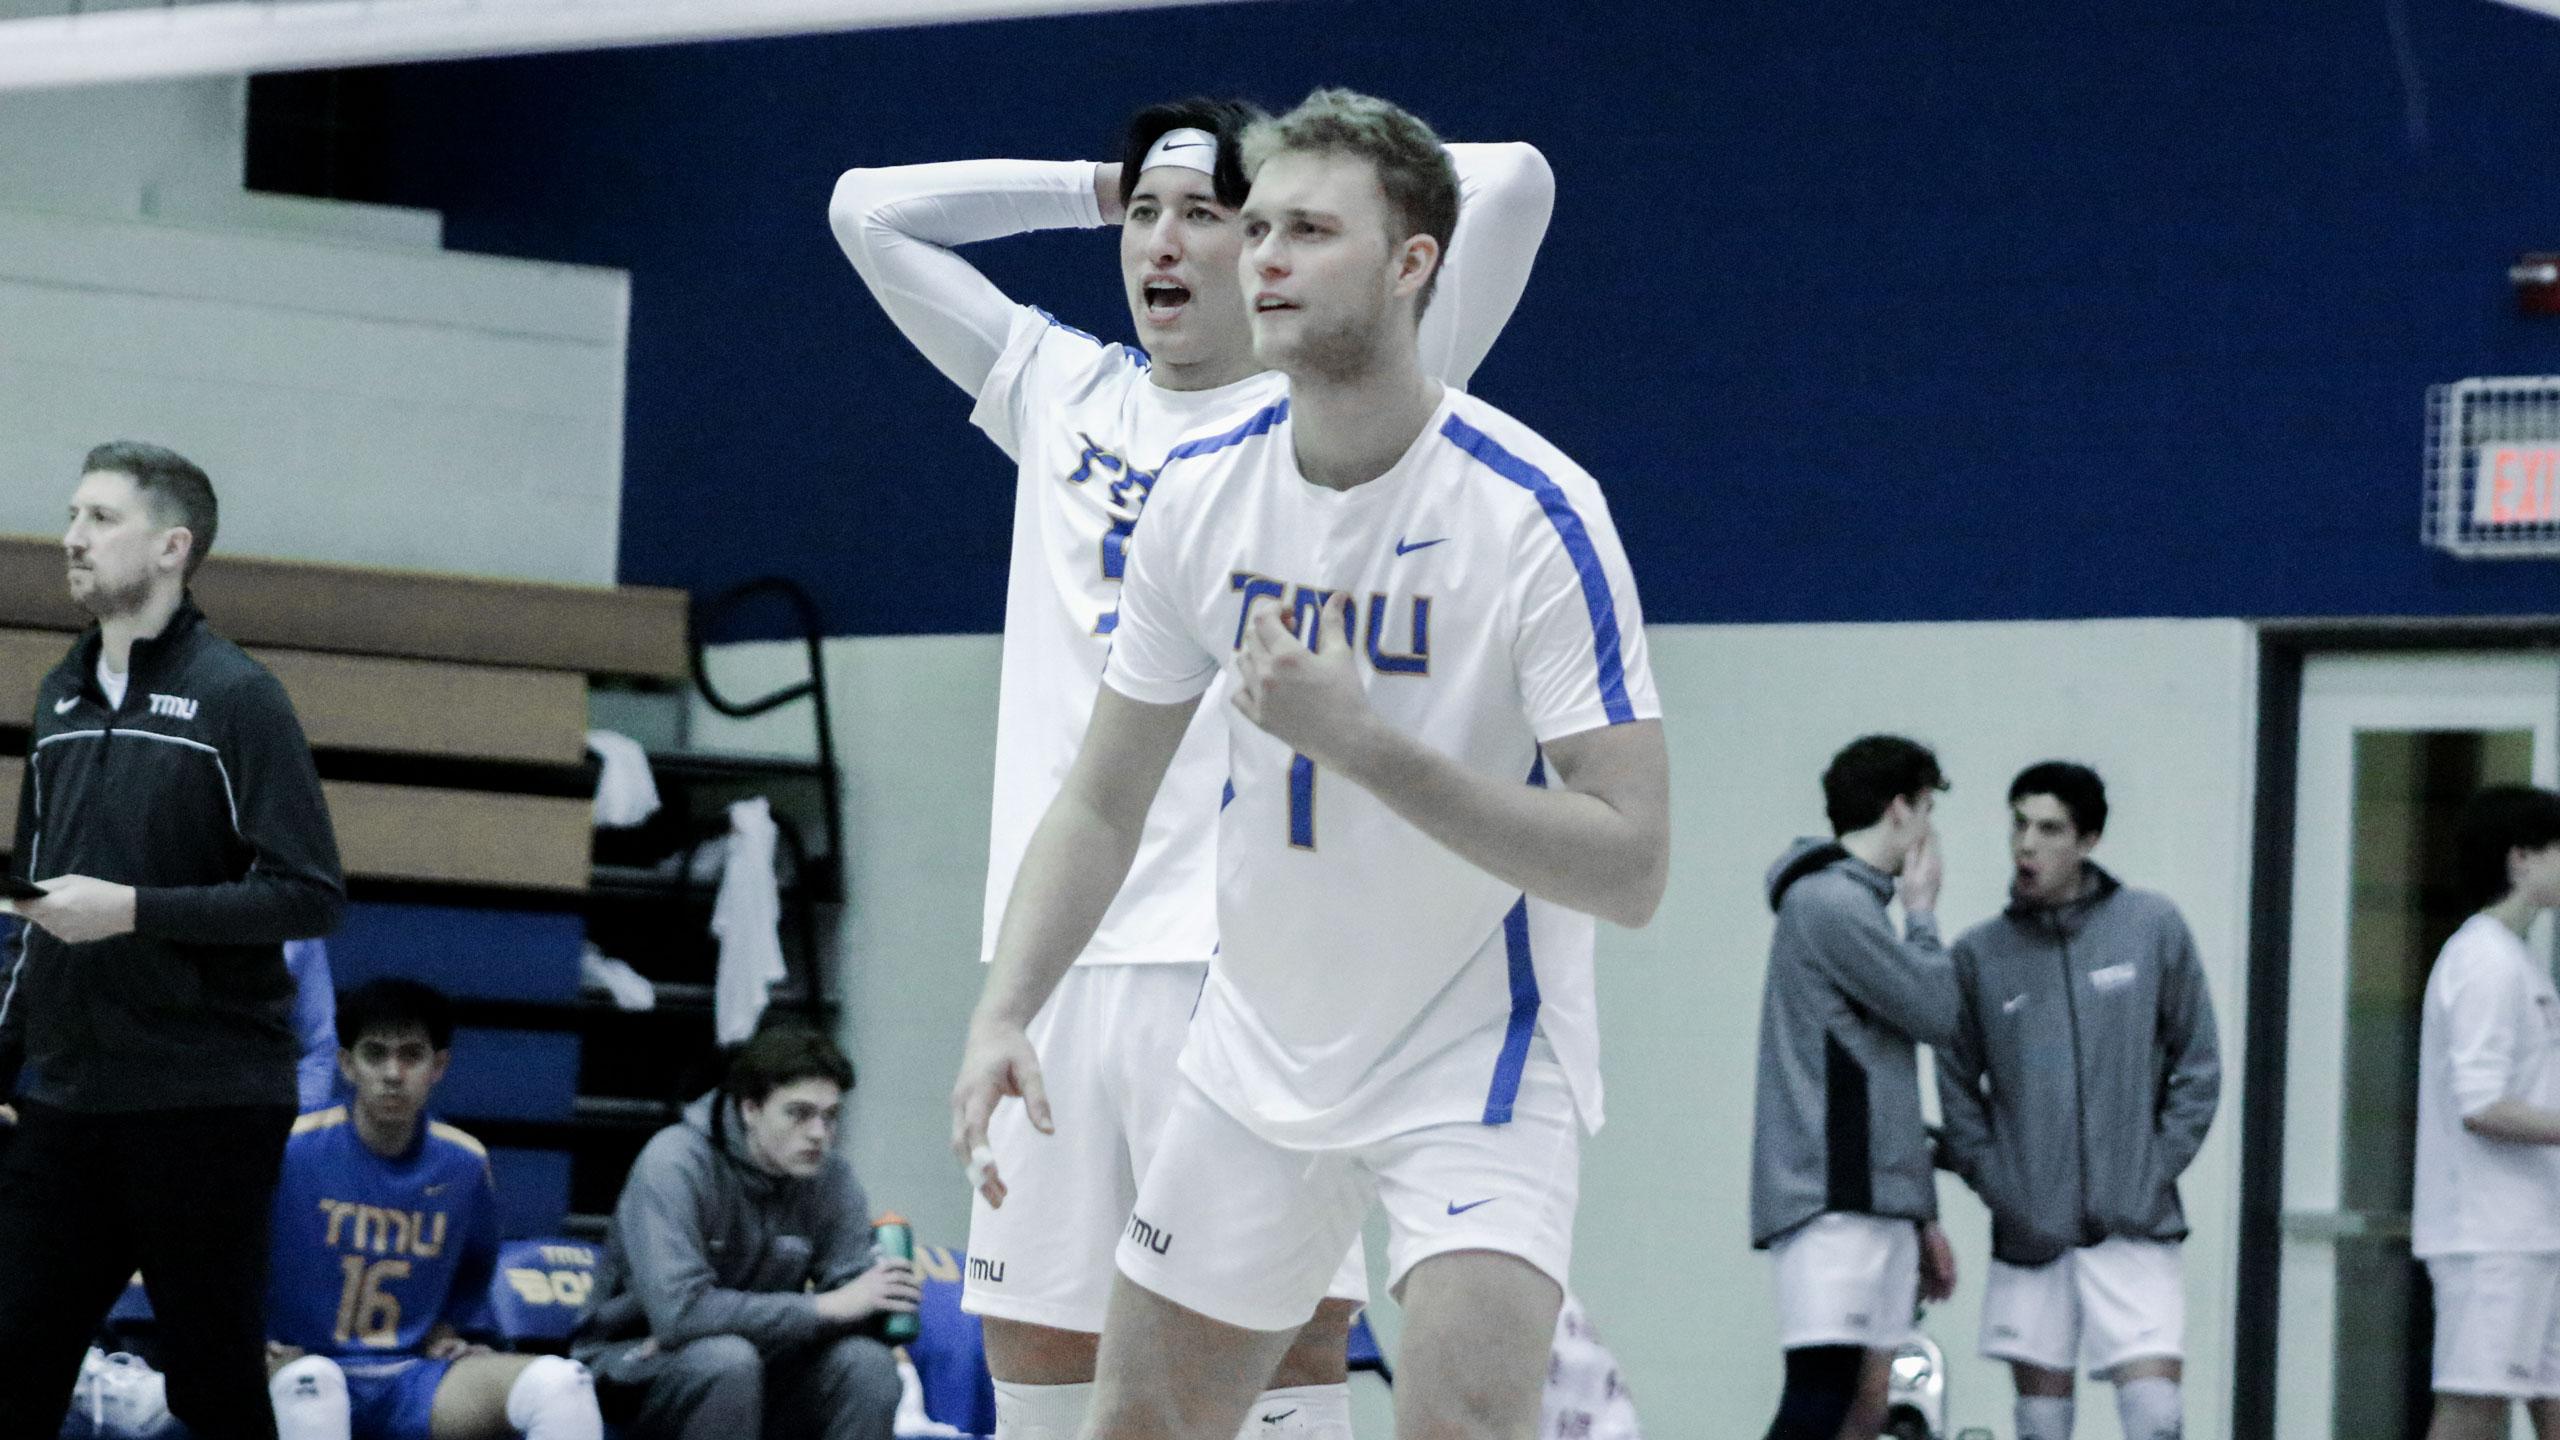 Two TMU men's volleyball players in white jerseys prepare for the next play